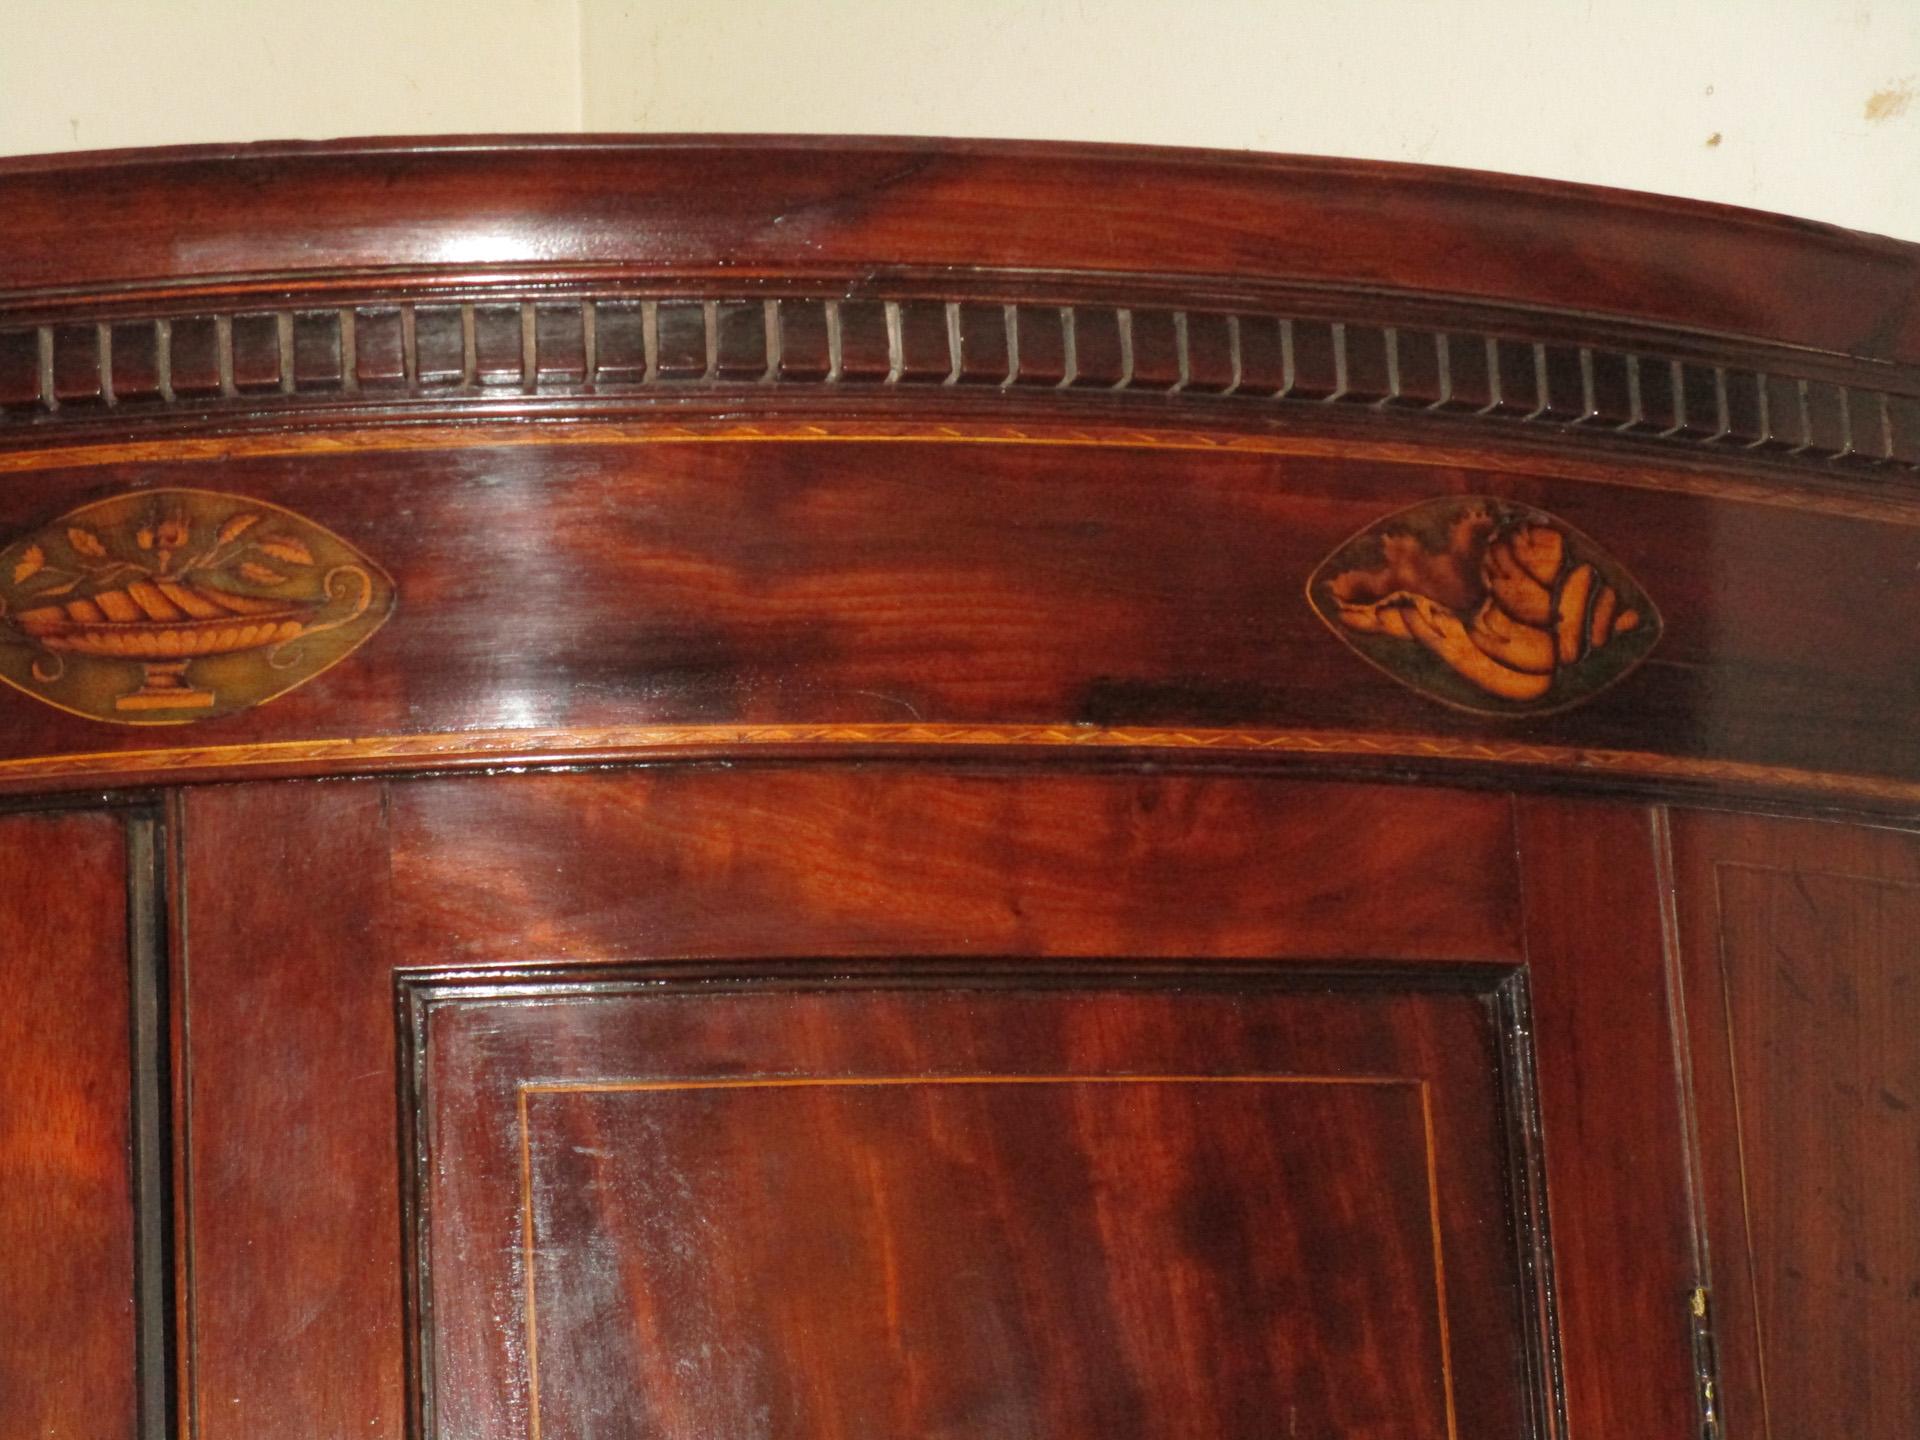 Late 18th century English mahogany bowfront hanging cupboard featuring string inlay on the doors with bone escutcheons, three curved interior drawers with brass pulls and four interior shelves. The intricate fruitwood inlay at the top of the cornice